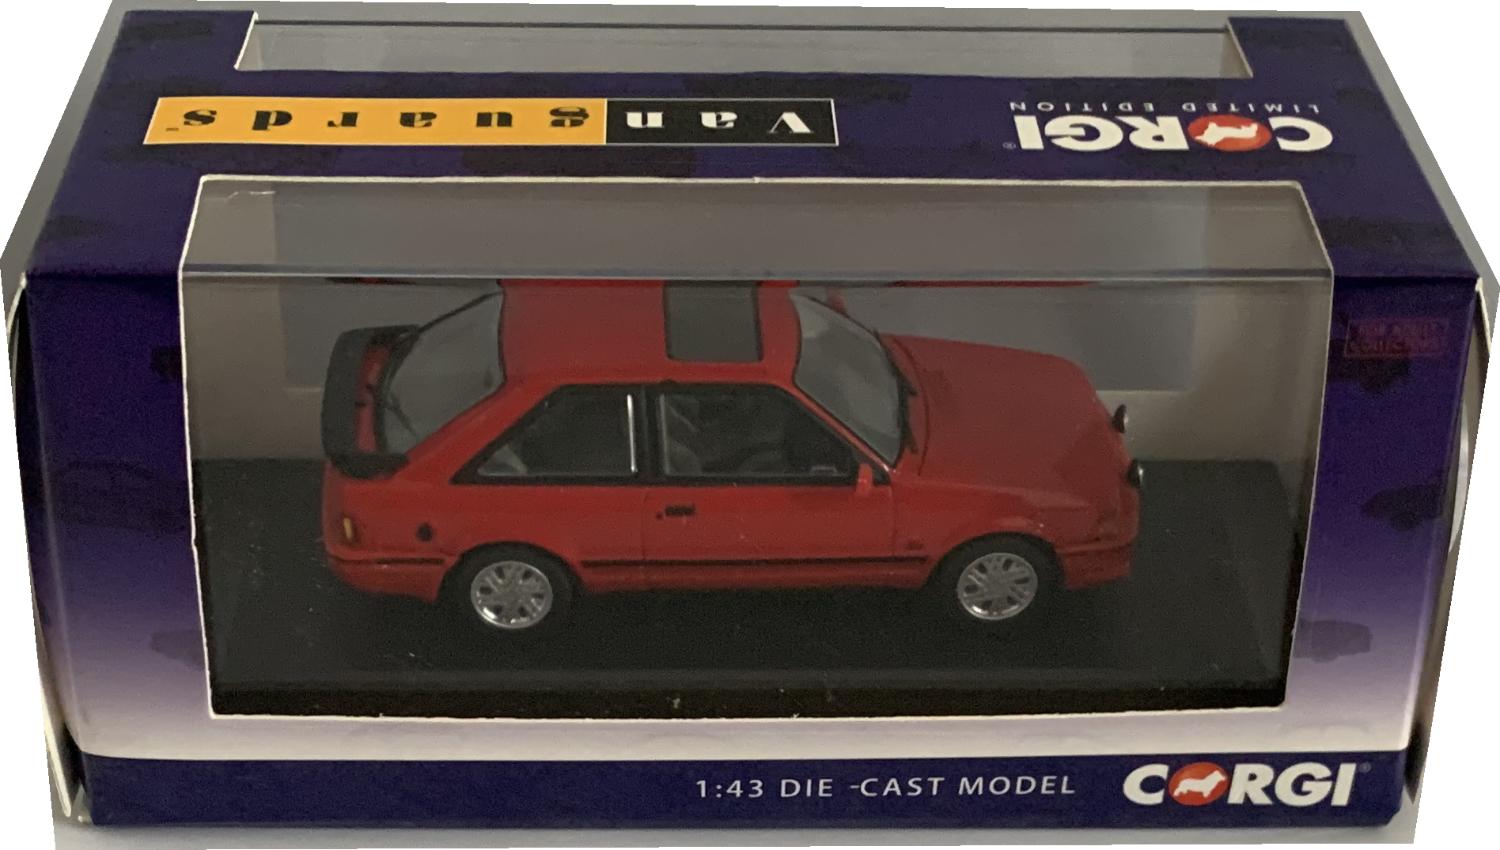 Ford Escort mk 4 XR3i 1989 in radiant red 1:43 scale model from Corgi Vanguards  limited edition model